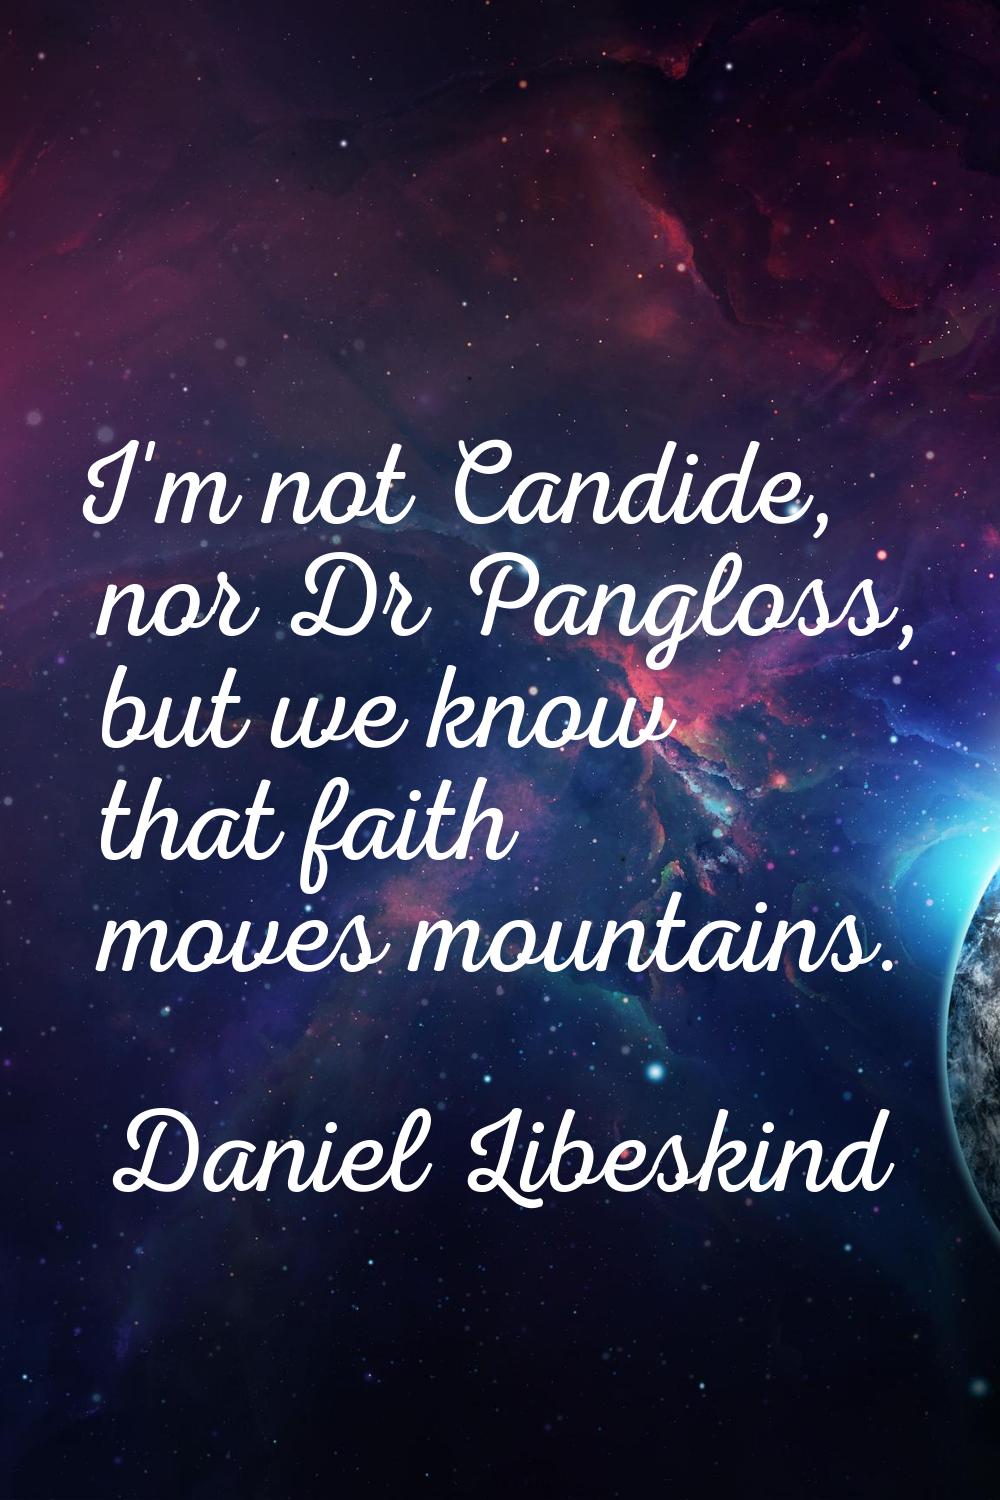 I'm not Candide, nor Dr Pangloss, but we know that faith moves mountains.